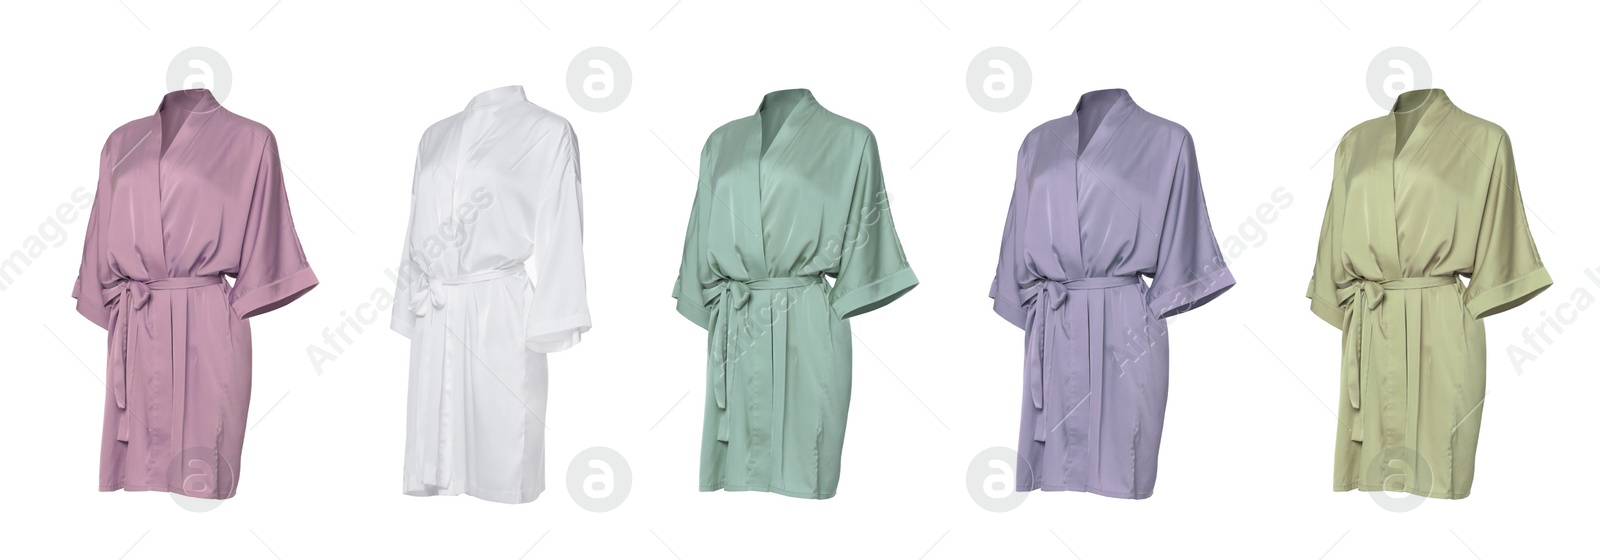 Image of Set of different color silk bathrobes on white background